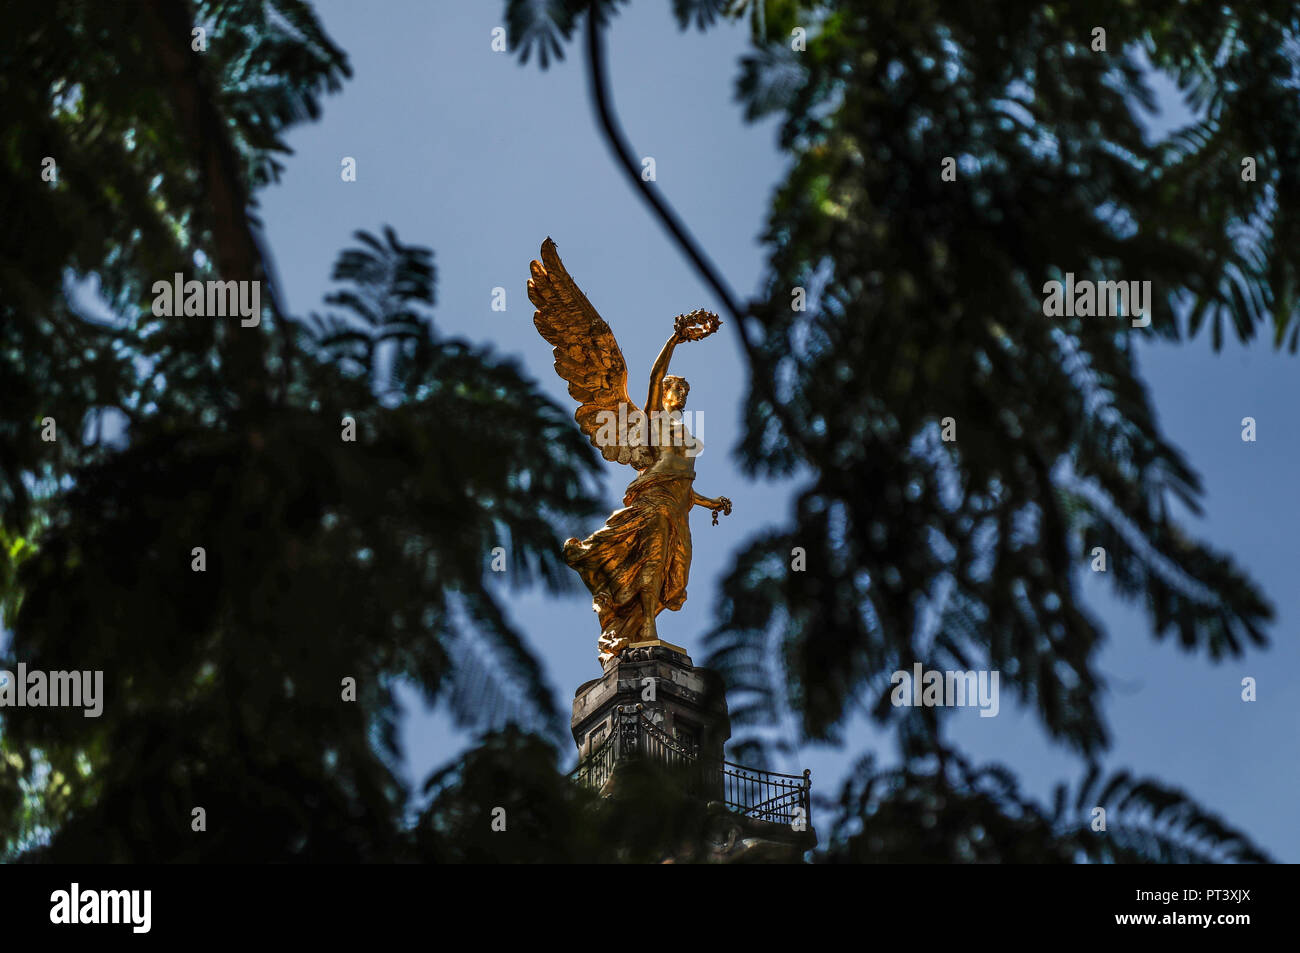 Monument to the Independence of Mexico. The Angel or The Angel of Independence. Sculpture located in the roundabout of Paseo de la Reforma in Mexico City. (Photo: Luis Gutierrez / NortePhoto.com)... Monumento a la Independencia de Mexico. El Ángel o El Ángel de la Independencia. Escultura ubicada en la glorieta del paseo de la Reforma en la Ciudad de México. (Foto: Luis Gutierrez / NortePhoto.com). Stock Photo